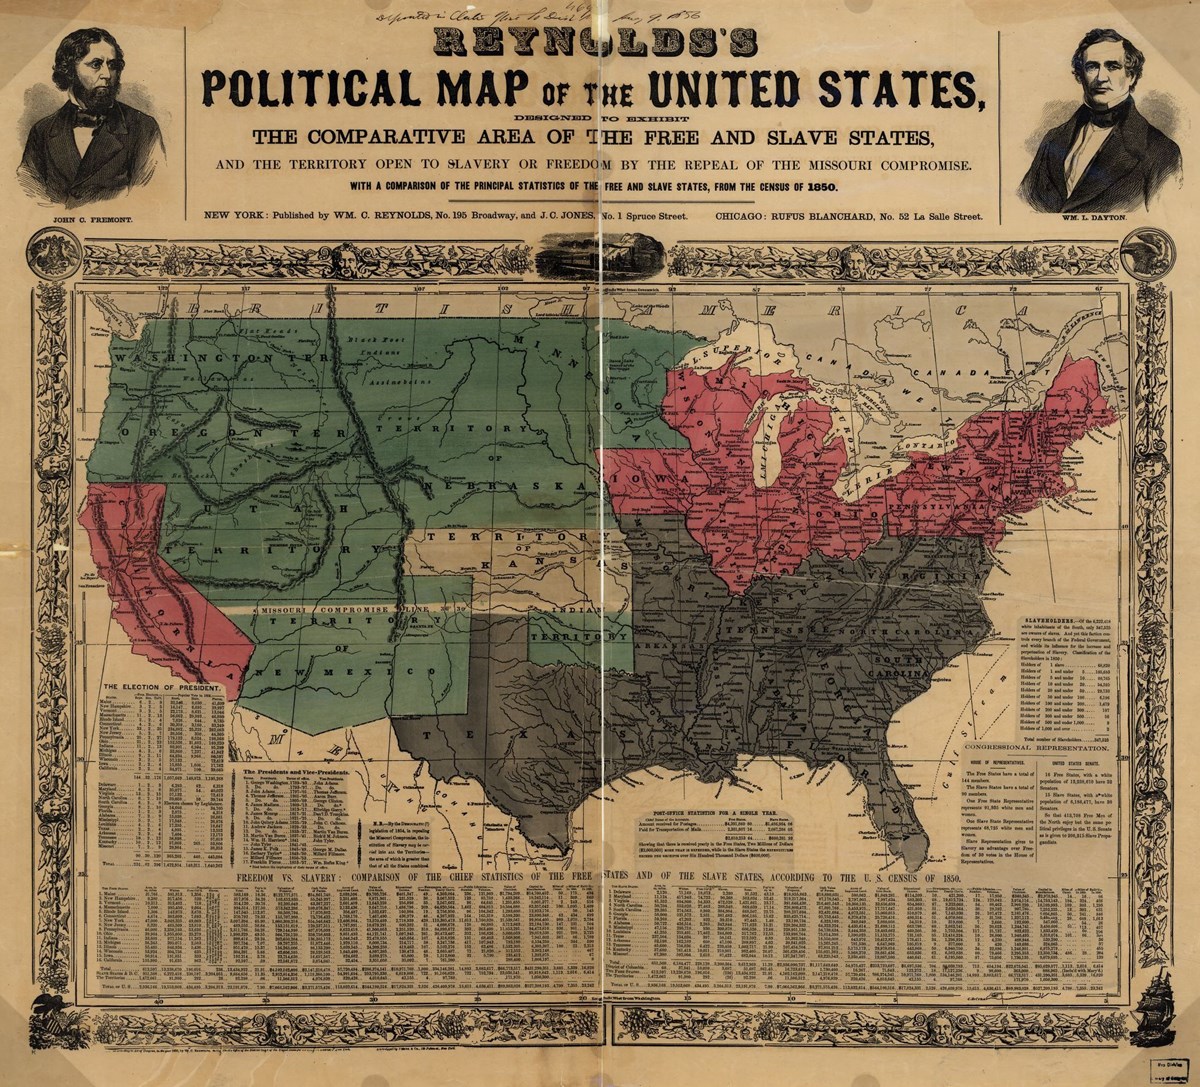 Map of the US in 1856, colored to show the northern/free states, southern/slave states, and territories (mostly in north central, and western US). The Missouri compromise line is also shown cutting between the Utah, New Mexico, and Kansas territories